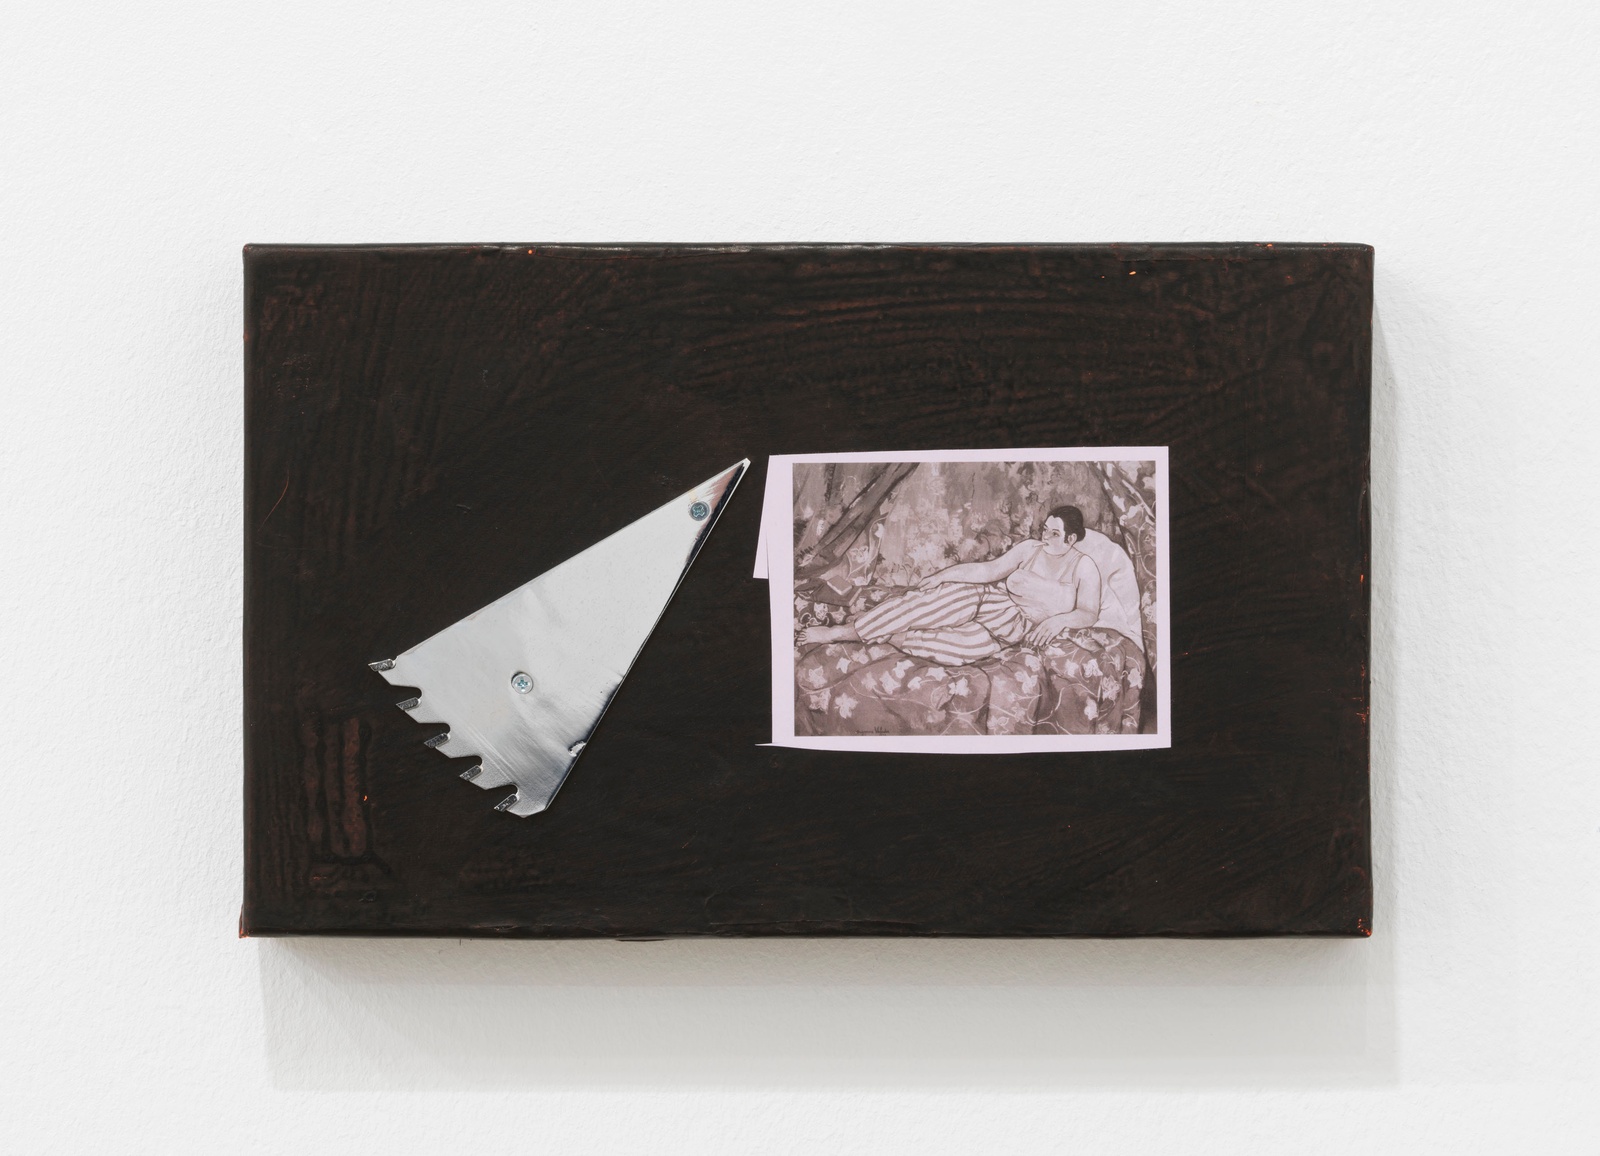 Blade, 2020. Paper, acrylic, ink, pigment print, chromed saw blade fragment, screws on cardboard, image: La Chambre bleue, selfportrait by Suzanne Valadon, 1923. 19,3 x 31,4 x 4,7 cm